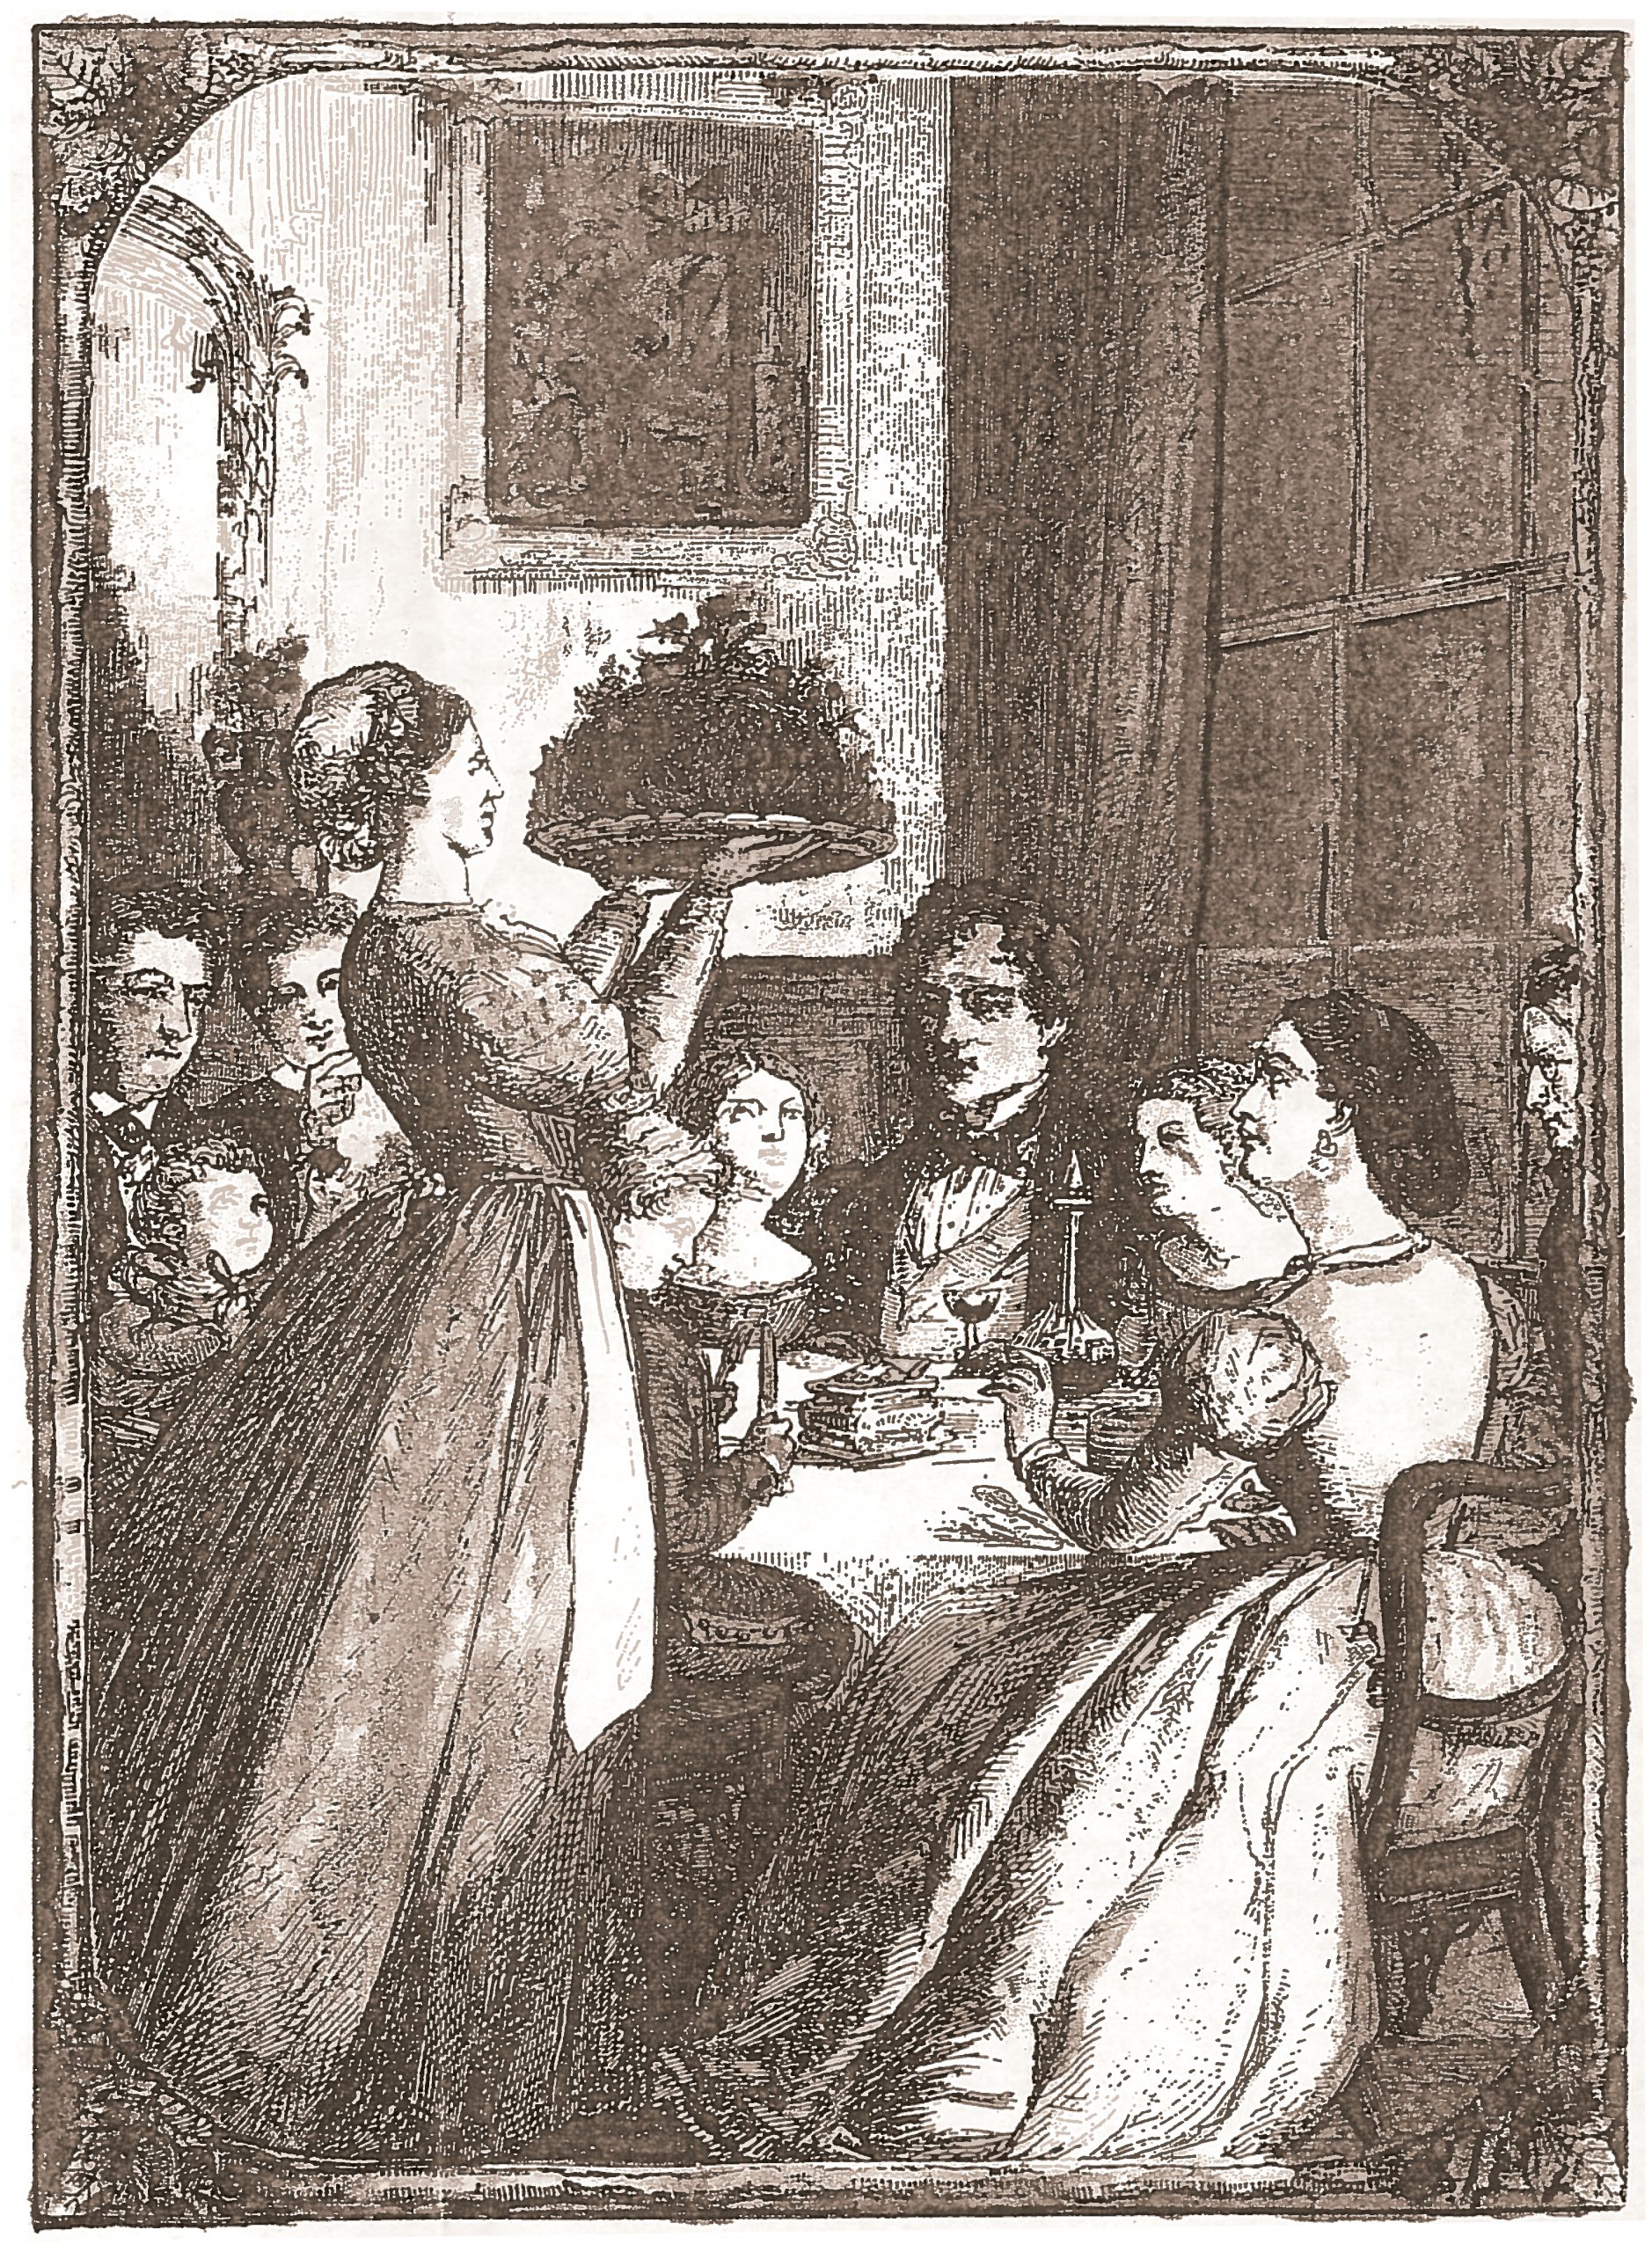 This 19th century engraving depicts Governor Allston’s Christmas dinner with his family, which was always accompanied by the very best Madeira. From the collection of the author.